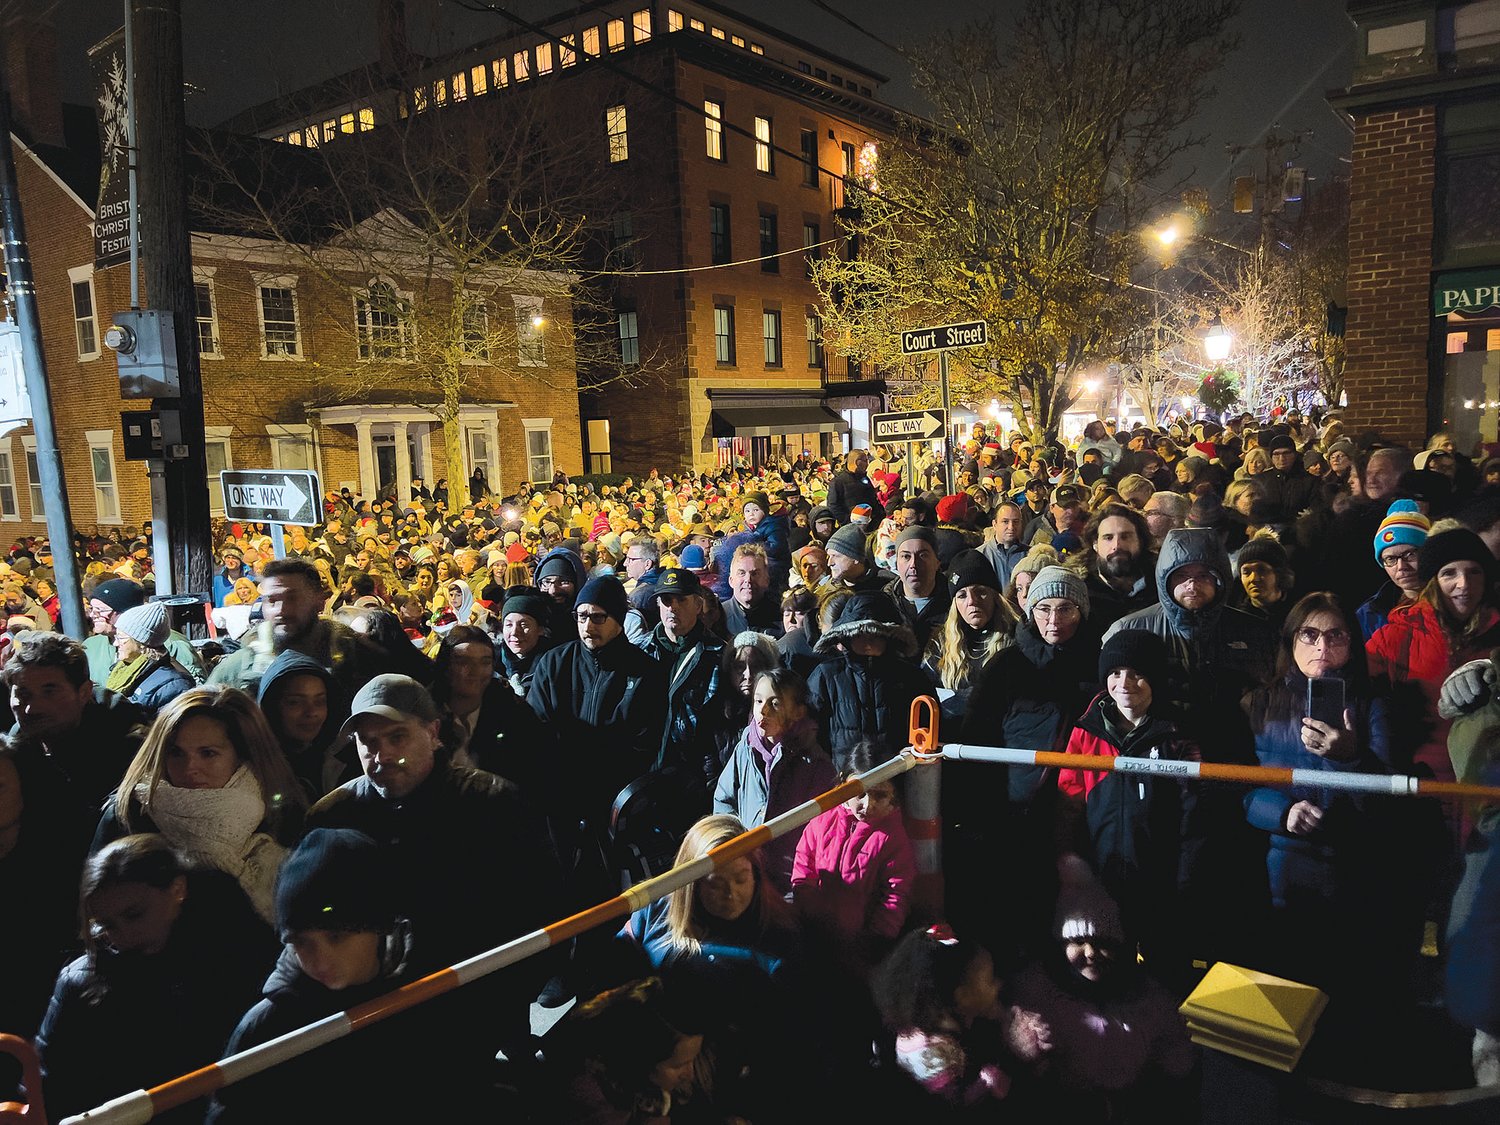 A huge crowd swarms close to the main stage as Bristol gets ready to light up its holiday season during the annual Grand Illumination on Sunday night.